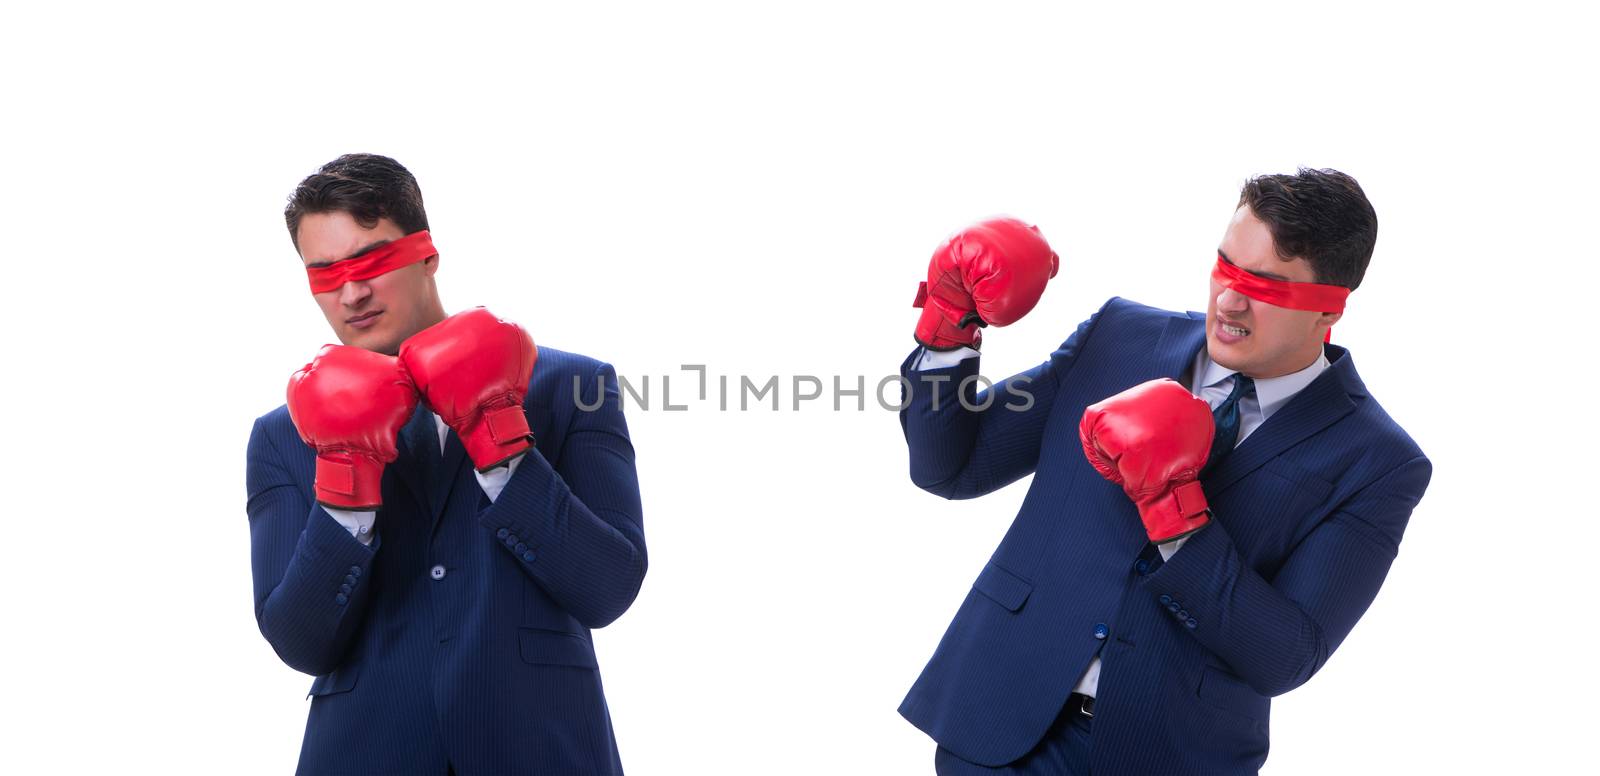 Lawyer with blindfold wearing boxing gloves isolated on white